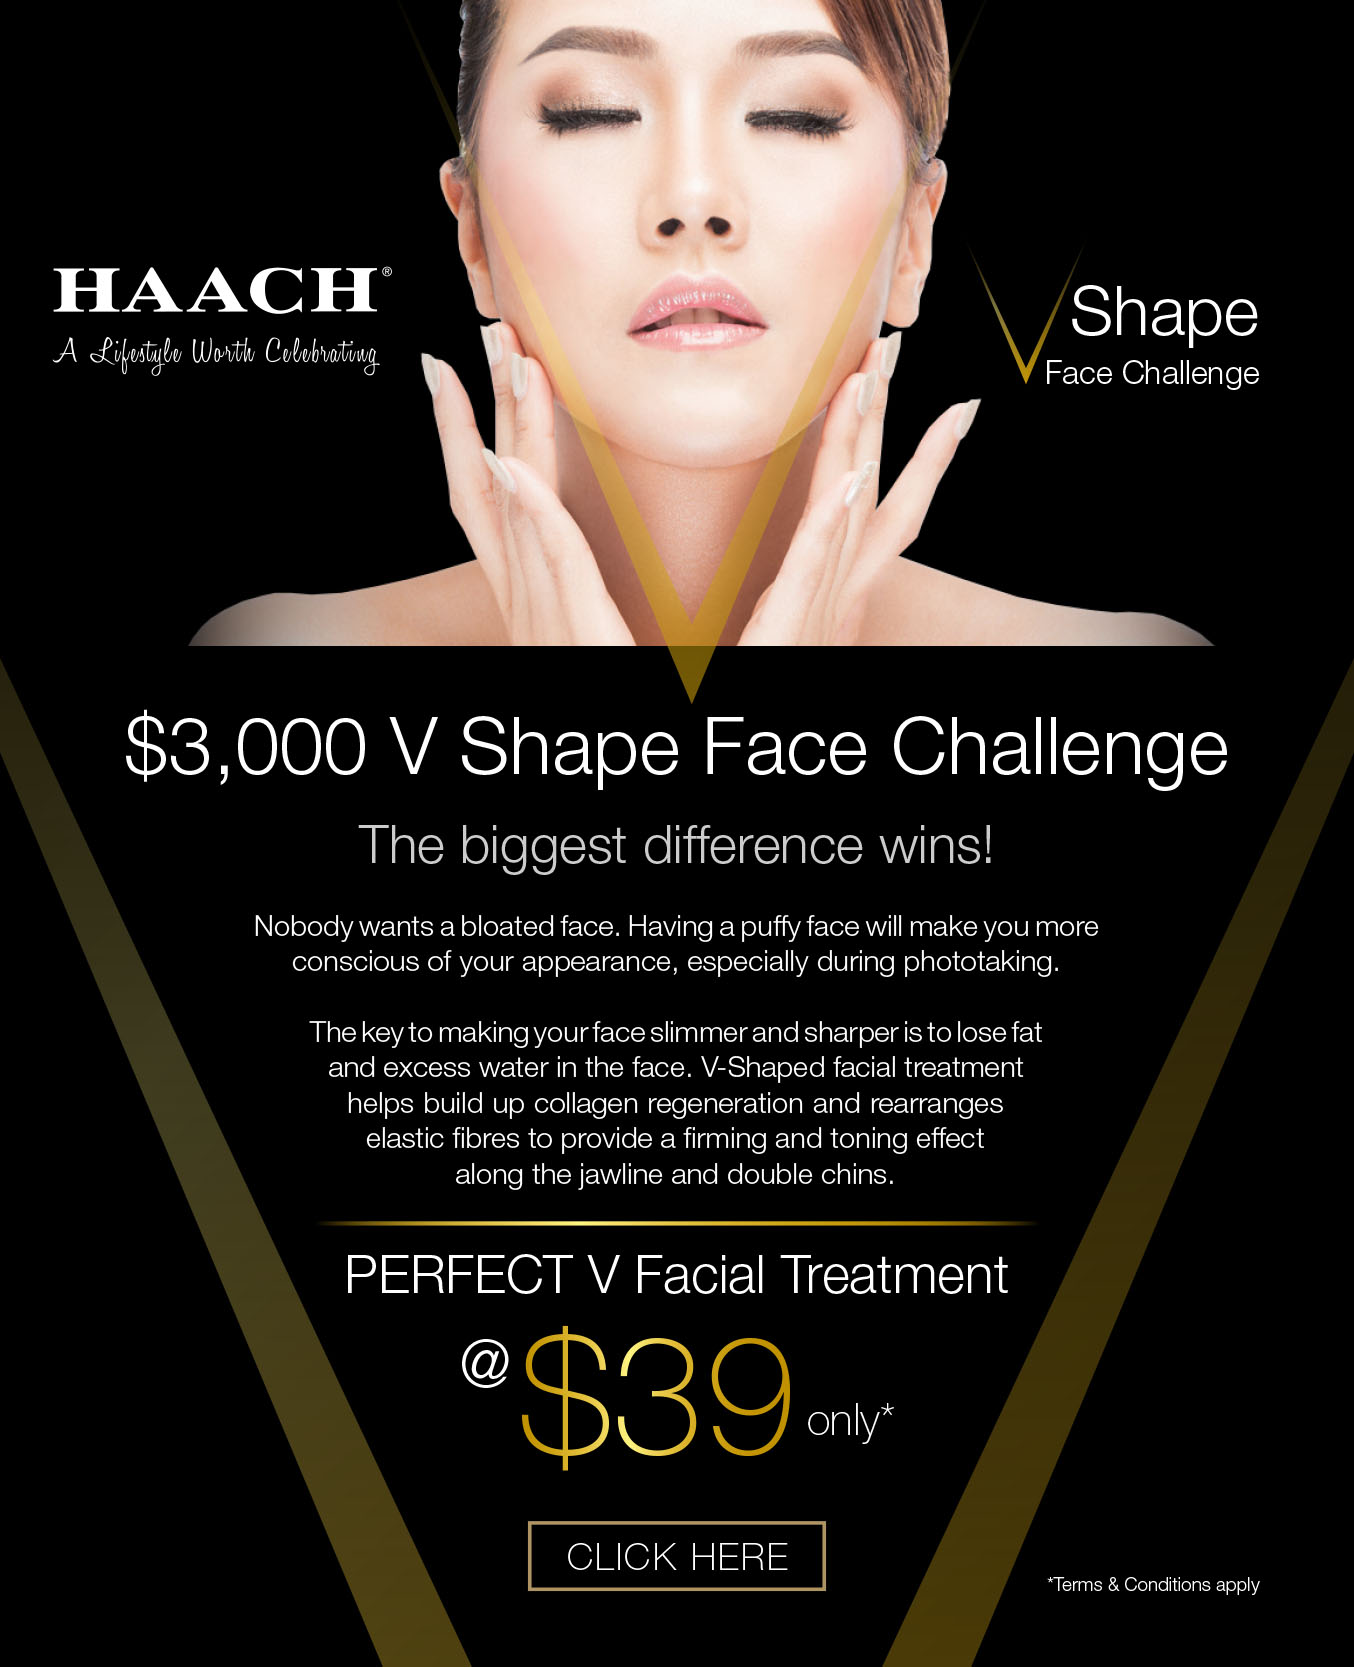 HAACH V Shape Face Challenge - The biggest difference wins! Nobody wants a bloated face. Having a puffy face will make you more conscious of your appearance, especially during photo-taking. Experience the Perfect V-Facial treatment day. Click here to find out more.